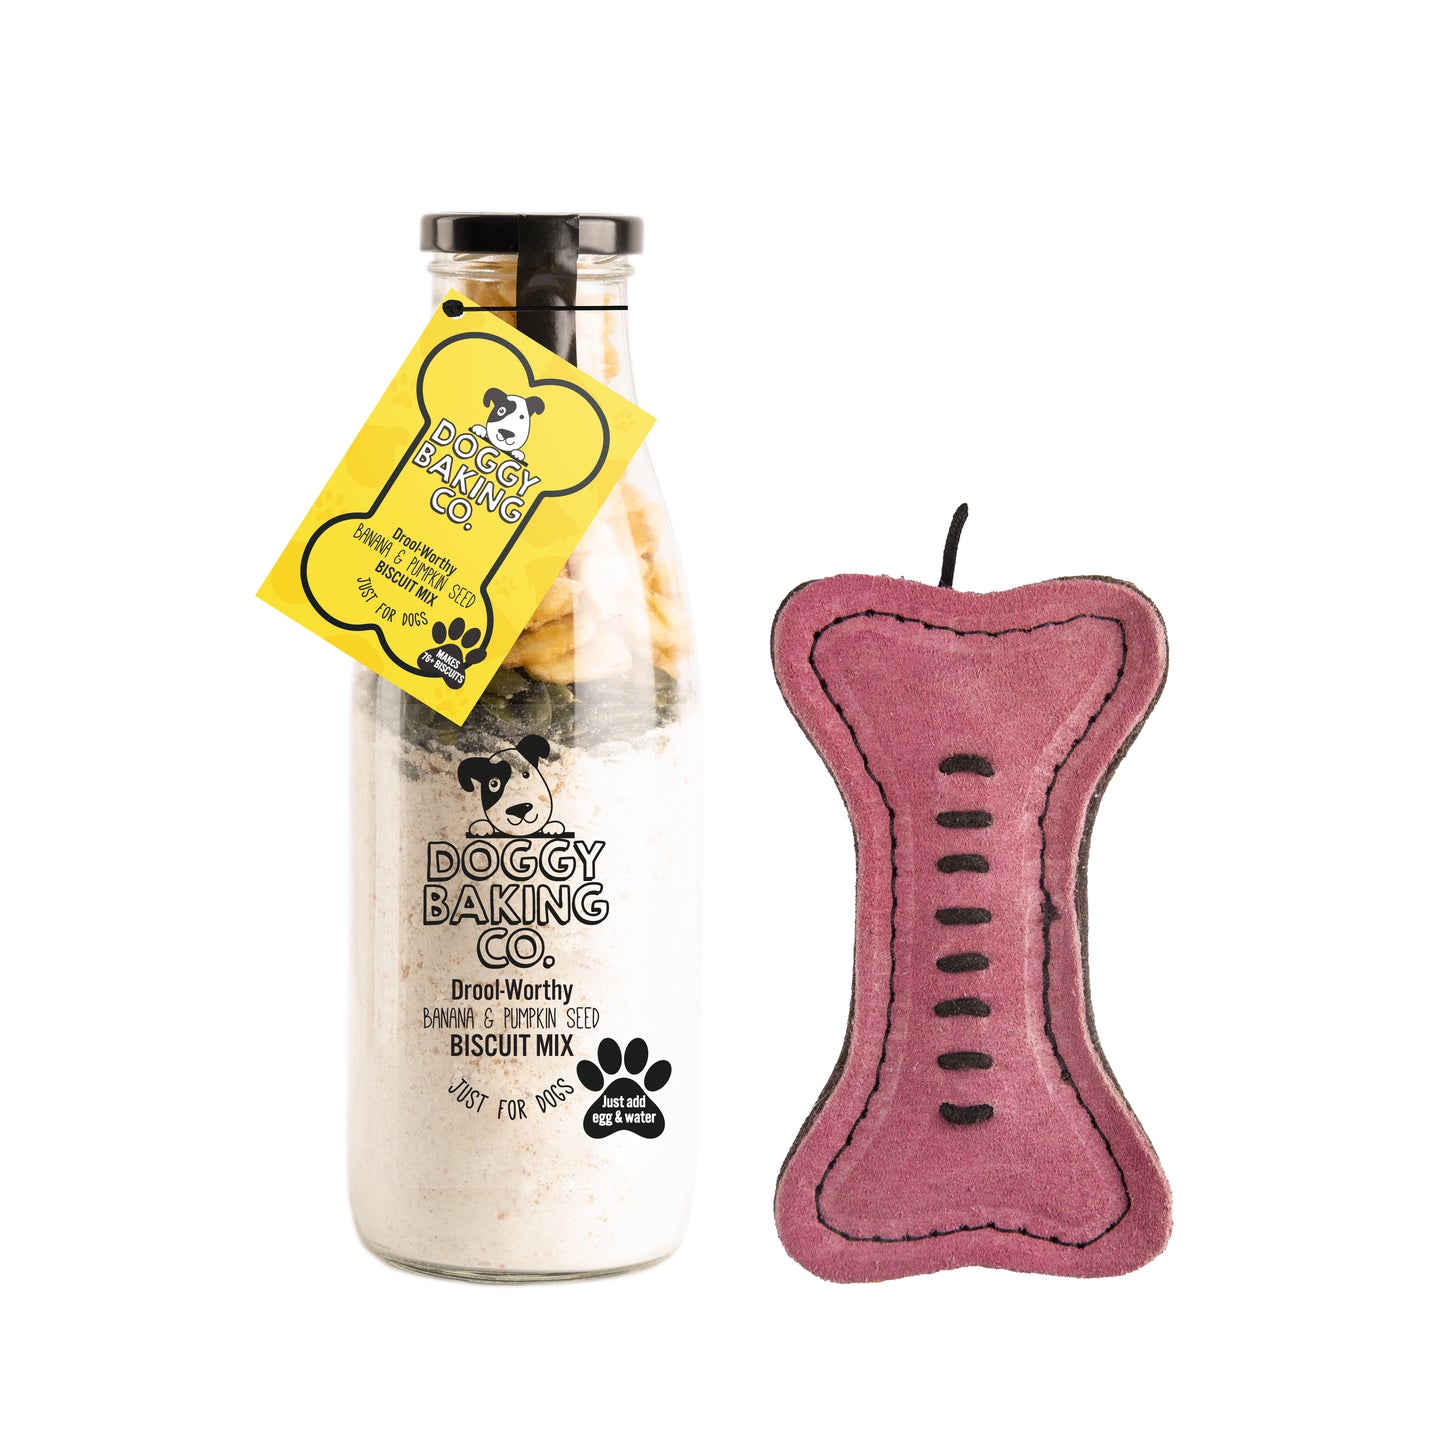 Pumpkin Seed & Banana Biscuit Mix & Pinkie Bone Eco Toy Bundle - Doggy Baking Co by The Bottled Baking Co